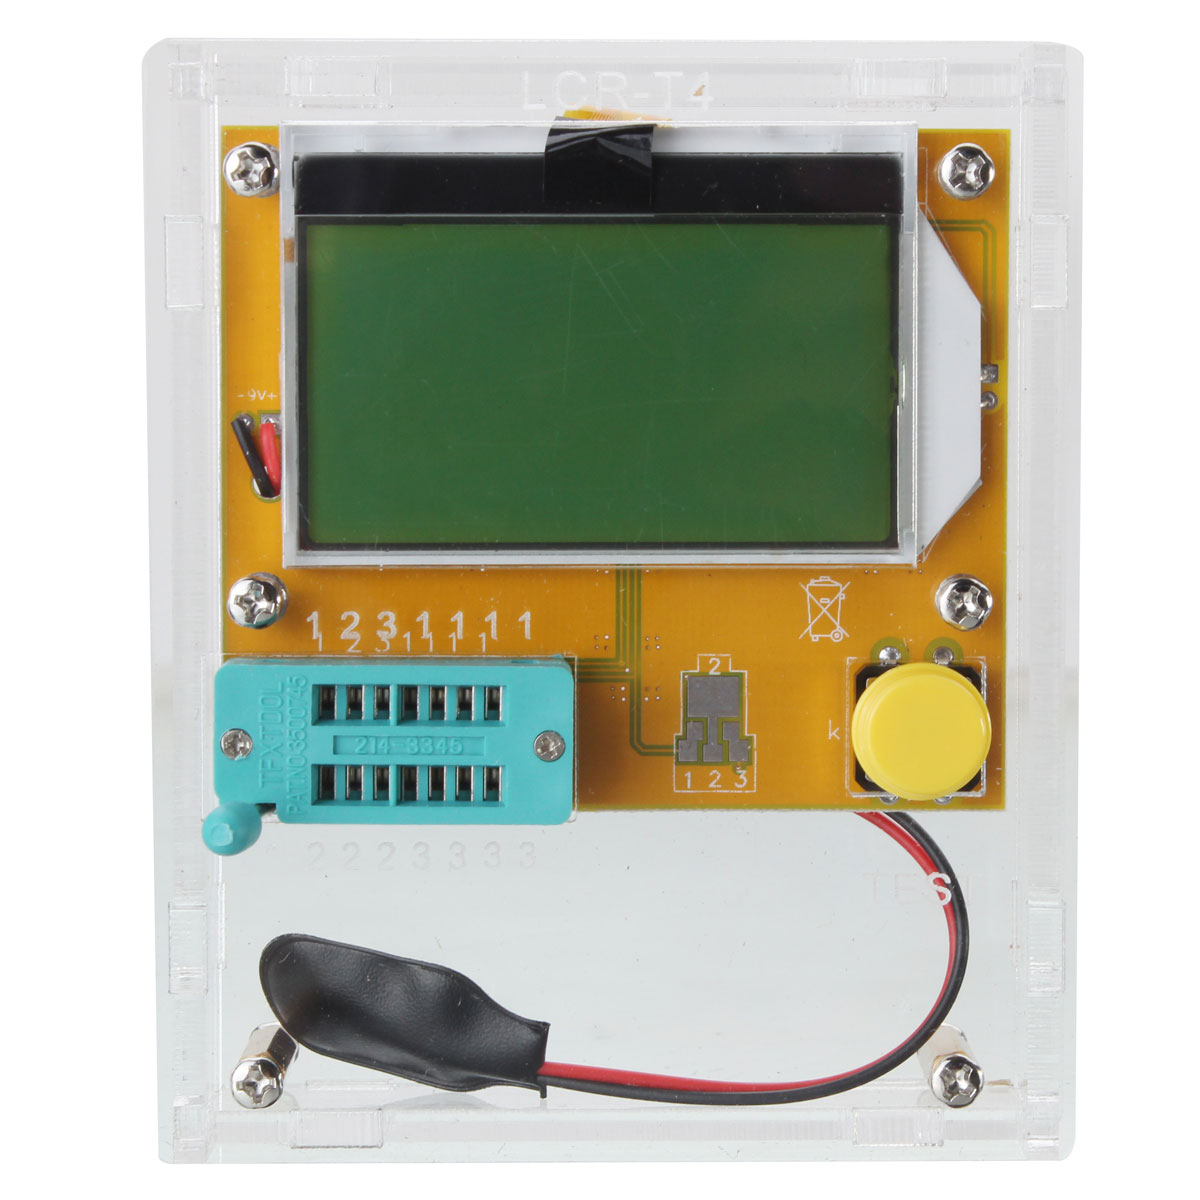 LCR-T4-Transistor-Tester-Diode-Triode-LCD-ESR-Meter-Inductance-With-Housing-1012208